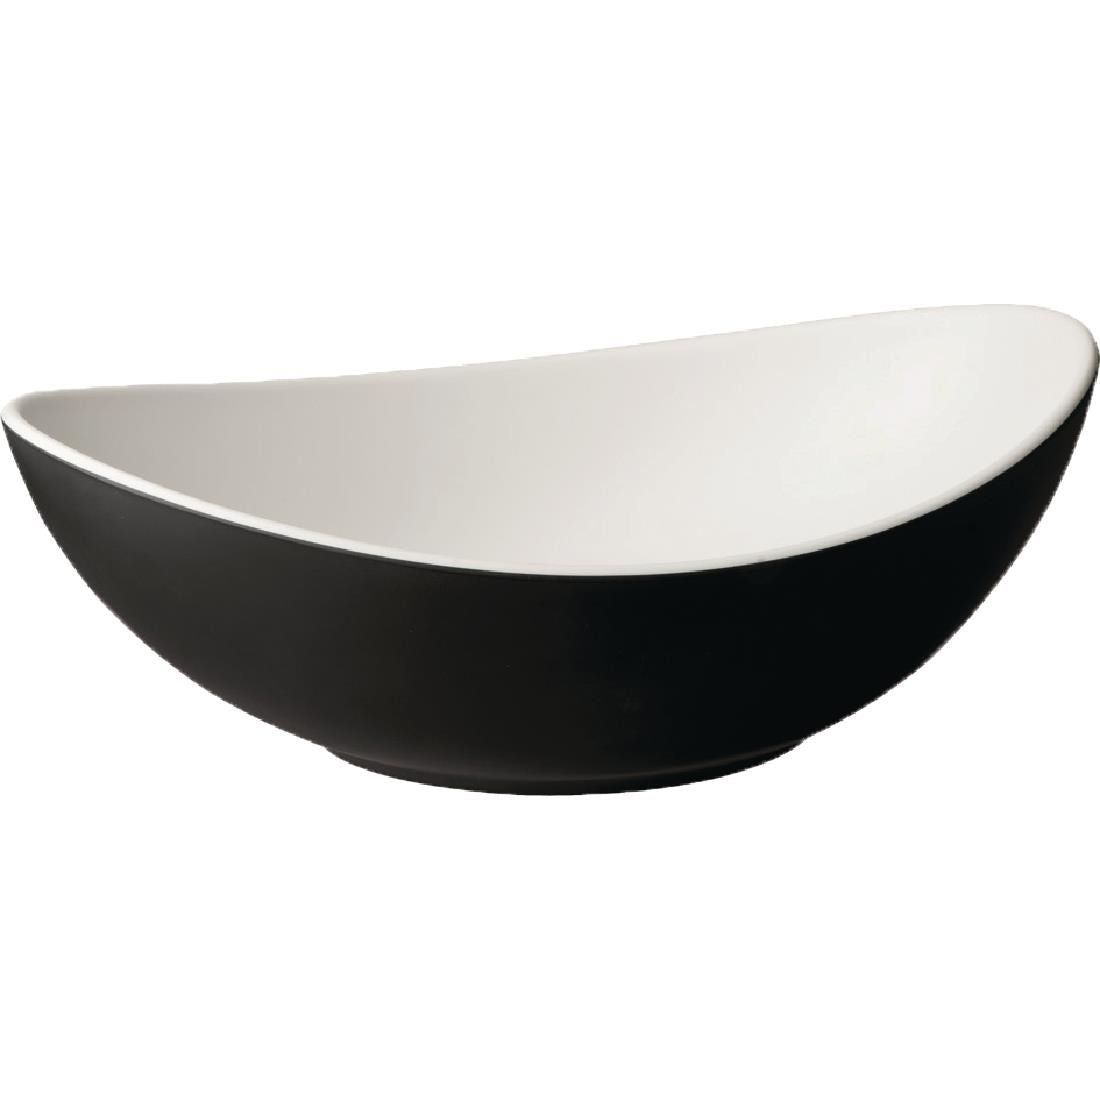 APS Dual Tone Curved Bowl 350ml JD Catering Equipment Solutions Ltd